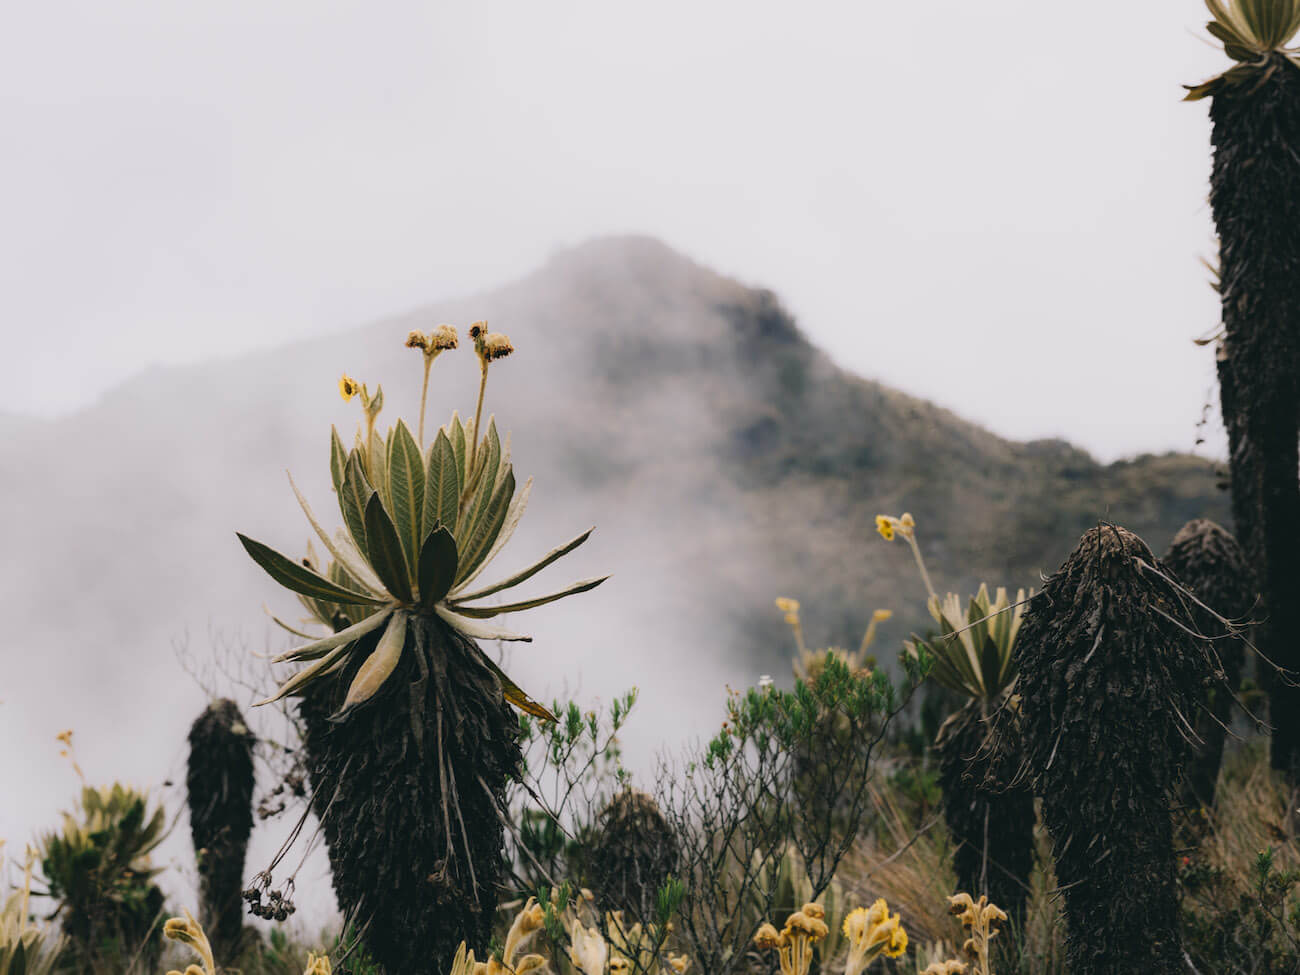 Frailejones in foreground and cloudy Alto del Burro in background